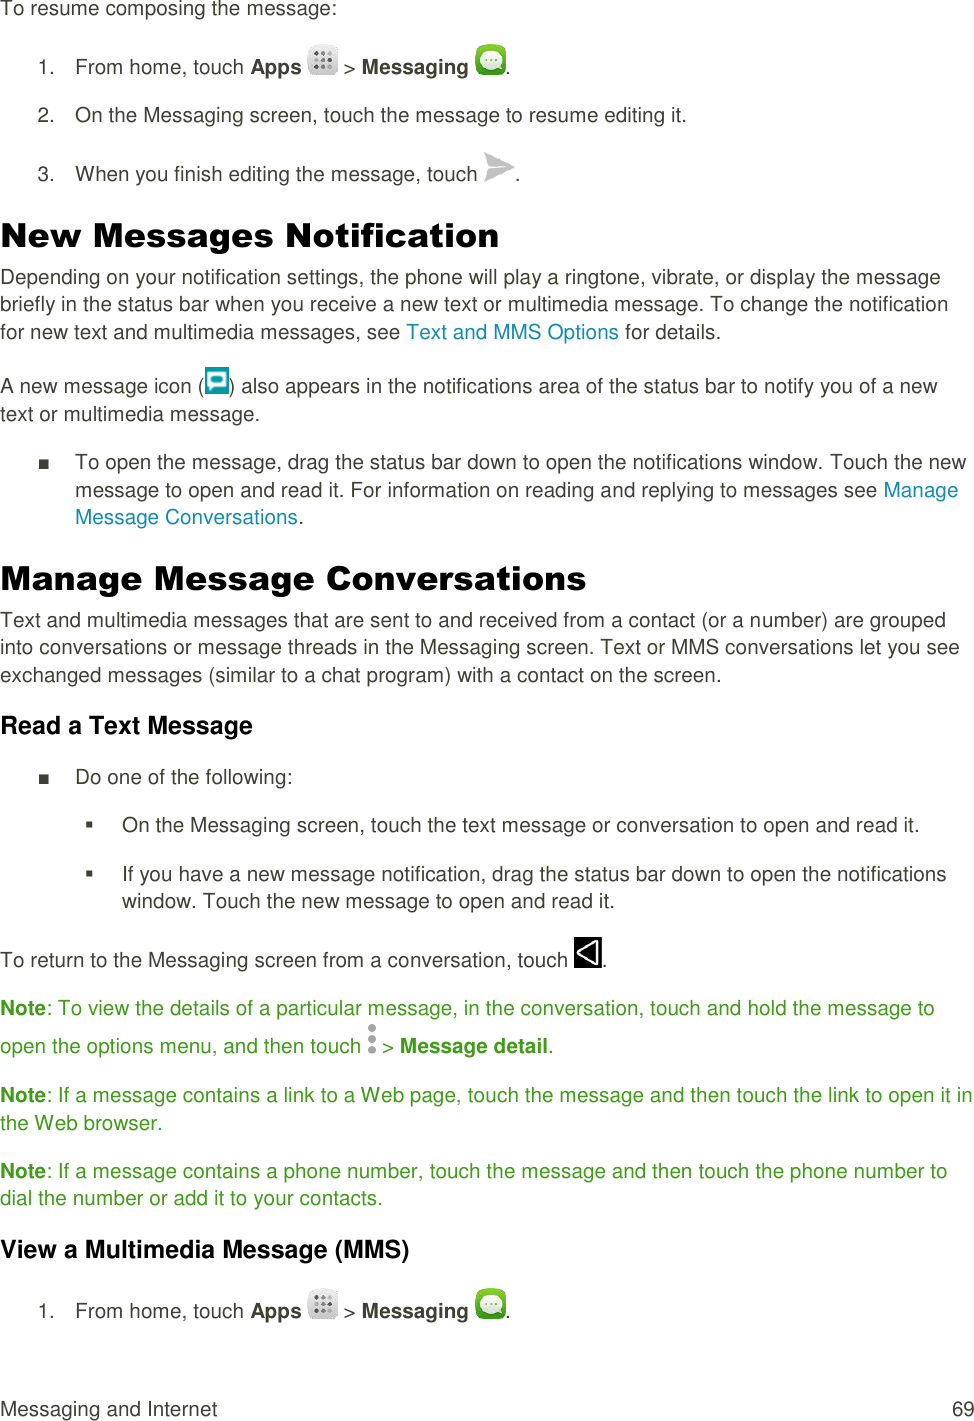 Messaging and Internet  69 To resume composing the message: 1.  From home, touch Apps   &gt; Messaging  . 2.  On the Messaging screen, touch the message to resume editing it. 3.  When you finish editing the message, touch  . New Messages Notification Depending on your notification settings, the phone will play a ringtone, vibrate, or display the message briefly in the status bar when you receive a new text or multimedia message. To change the notification for new text and multimedia messages, see Text and MMS Options for details. A new message icon ( ) also appears in the notifications area of the status bar to notify you of a new text or multimedia message.  ■  To open the message, drag the status bar down to open the notifications window. Touch the new message to open and read it. For information on reading and replying to messages see Manage Message Conversations. Manage Message Conversations Text and multimedia messages that are sent to and received from a contact (or a number) are grouped into conversations or message threads in the Messaging screen. Text or MMS conversations let you see exchanged messages (similar to a chat program) with a contact on the screen. Read a Text Message ■  Do one of the following:   On the Messaging screen, touch the text message or conversation to open and read it.   If you have a new message notification, drag the status bar down to open the notifications window. Touch the new message to open and read it. To return to the Messaging screen from a conversation, touch  . Note: To view the details of a particular message, in the conversation, touch and hold the message to open the options menu, and then touch   &gt; Message detail. Note: If a message contains a link to a Web page, touch the message and then touch the link to open it in the Web browser. Note: If a message contains a phone number, touch the message and then touch the phone number to dial the number or add it to your contacts. View a Multimedia Message (MMS) 1.  From home, touch Apps   &gt; Messaging  . 